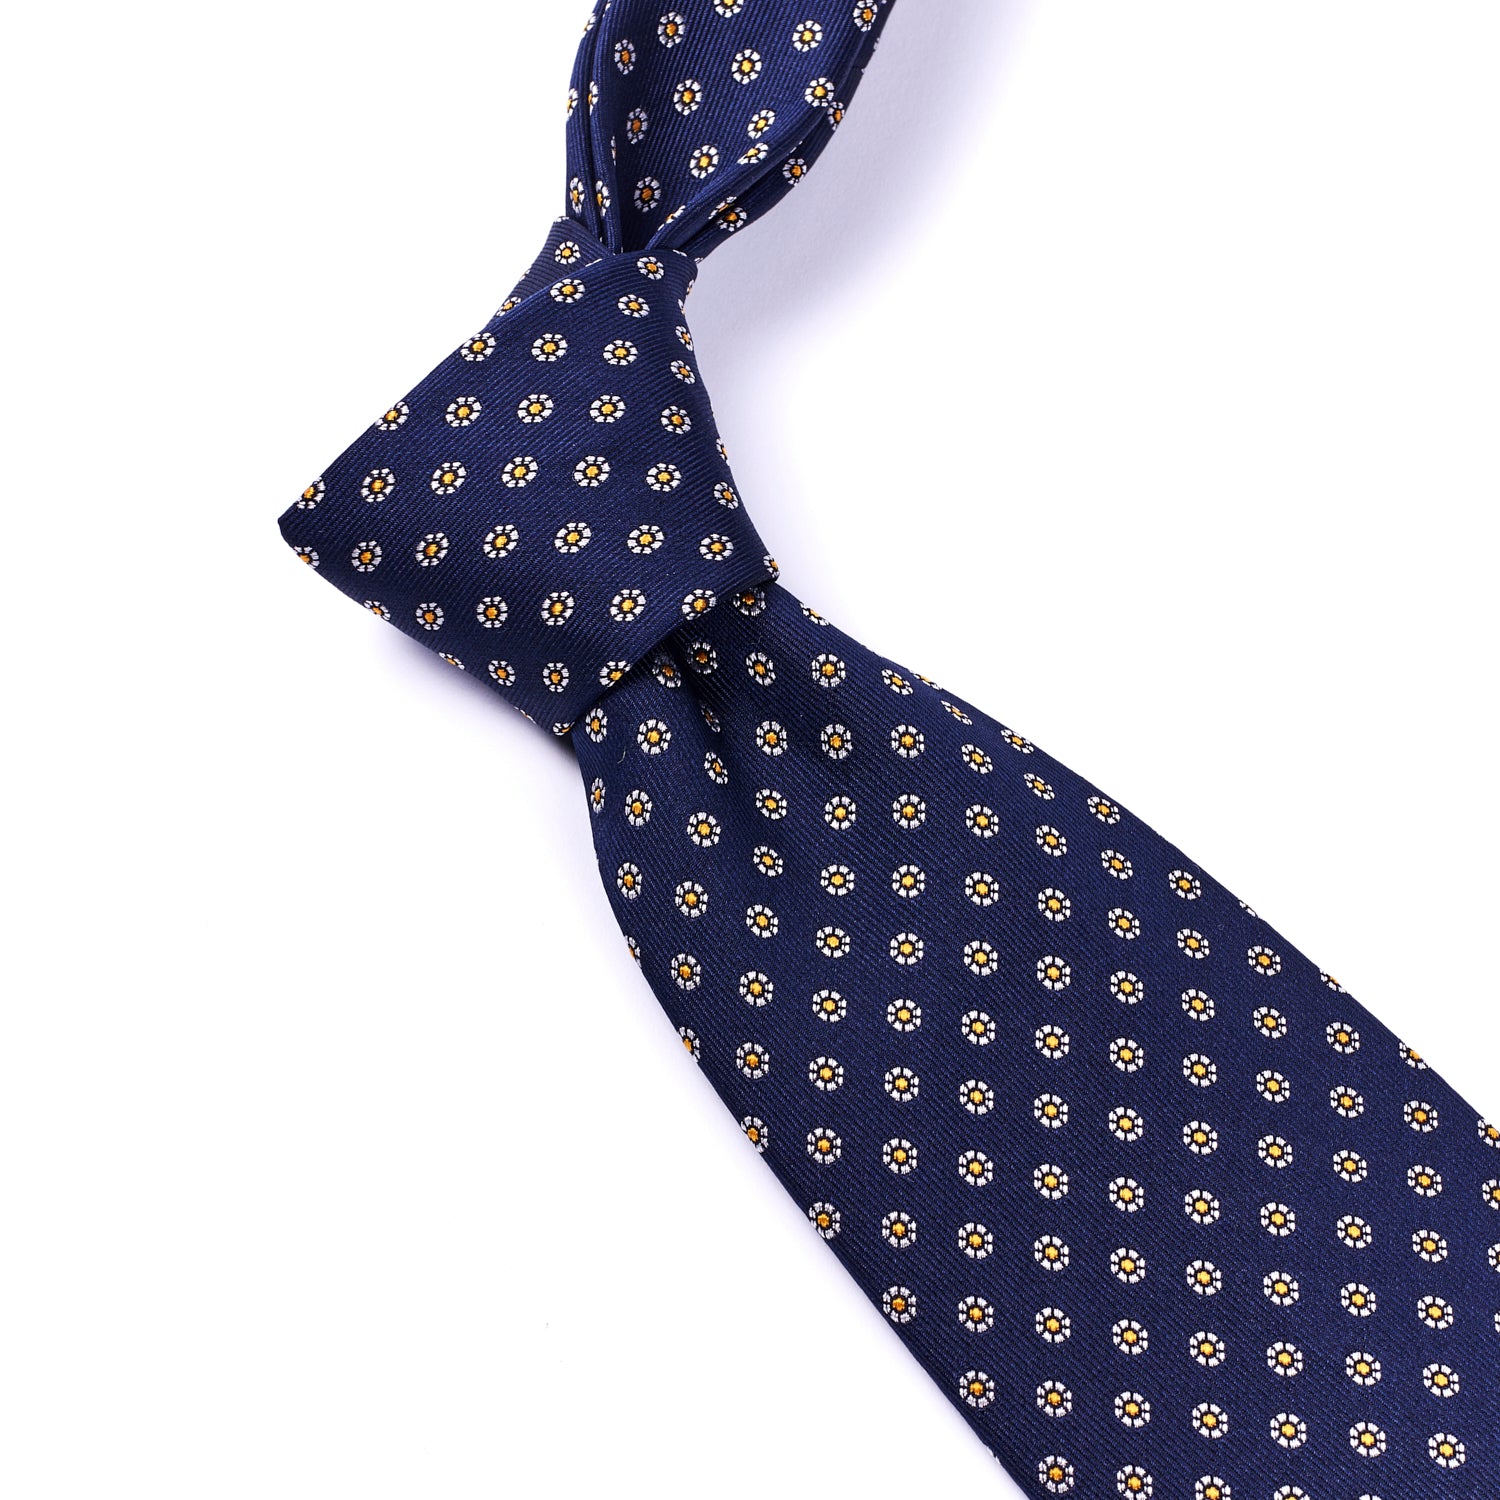 A handmade Sovereign Grade Midnight Navy Floral Jacquard Tie, 150 cm with gold dots, known for its quality, by KirbyAllison.com.